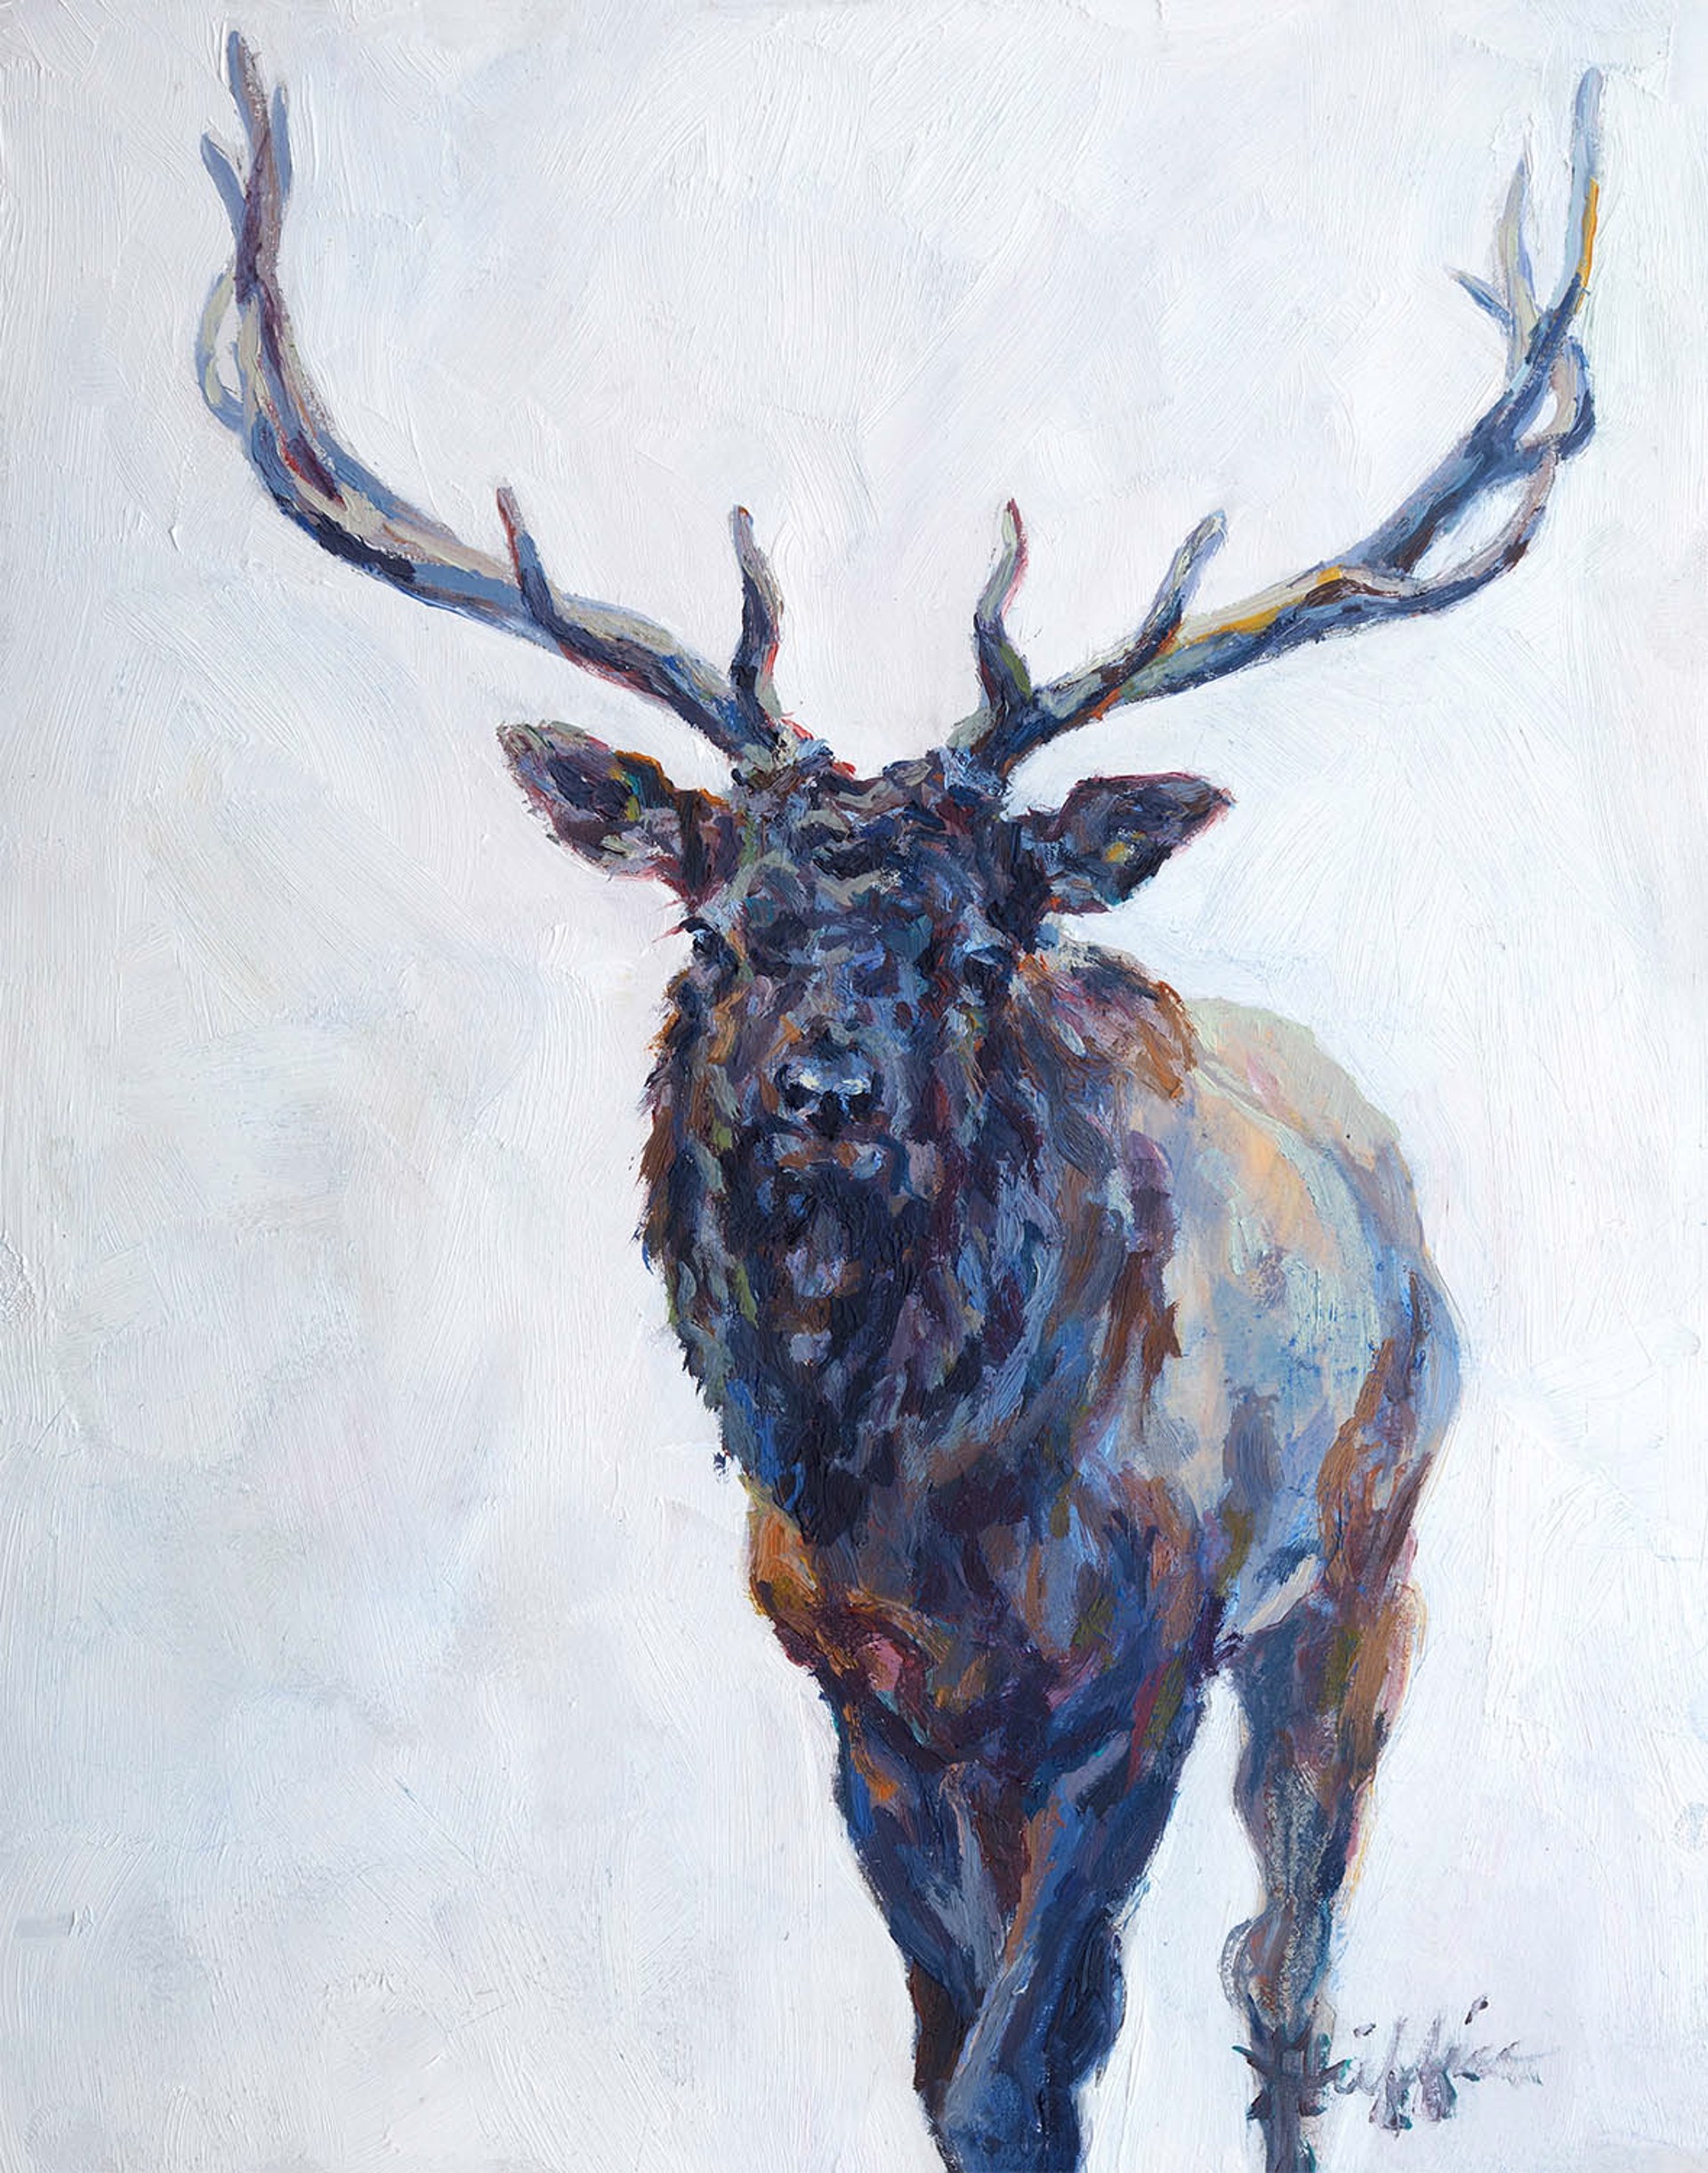 Original Oil Painting On Panel Of An Elk Small Study 8x10 Blue Gray